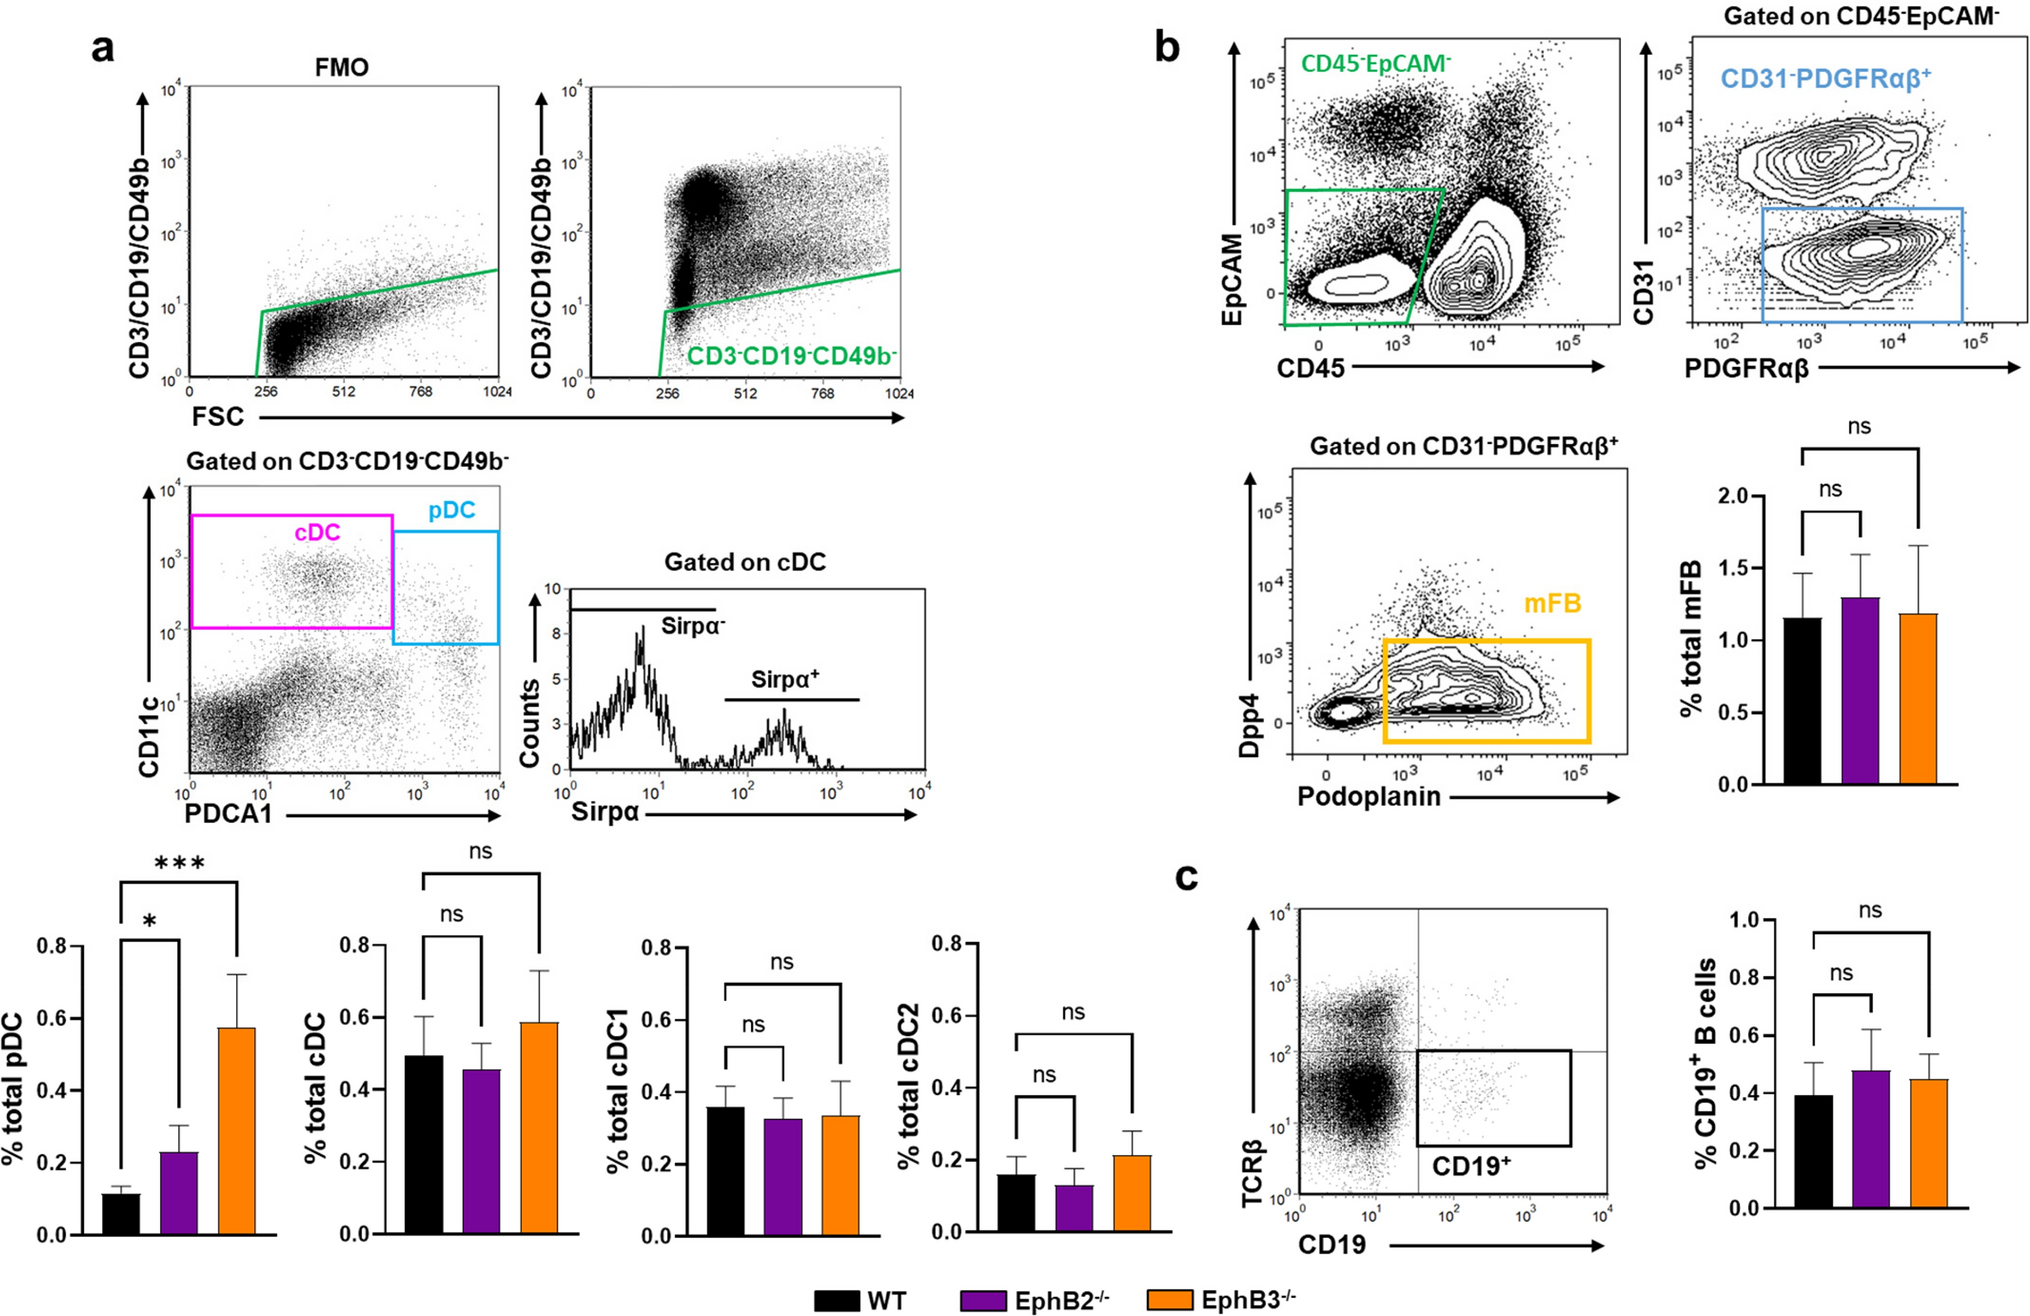 Peripheral T-cell responses of EphB2- and EphB3-deficient mice in a model of collagen-induced arthritis